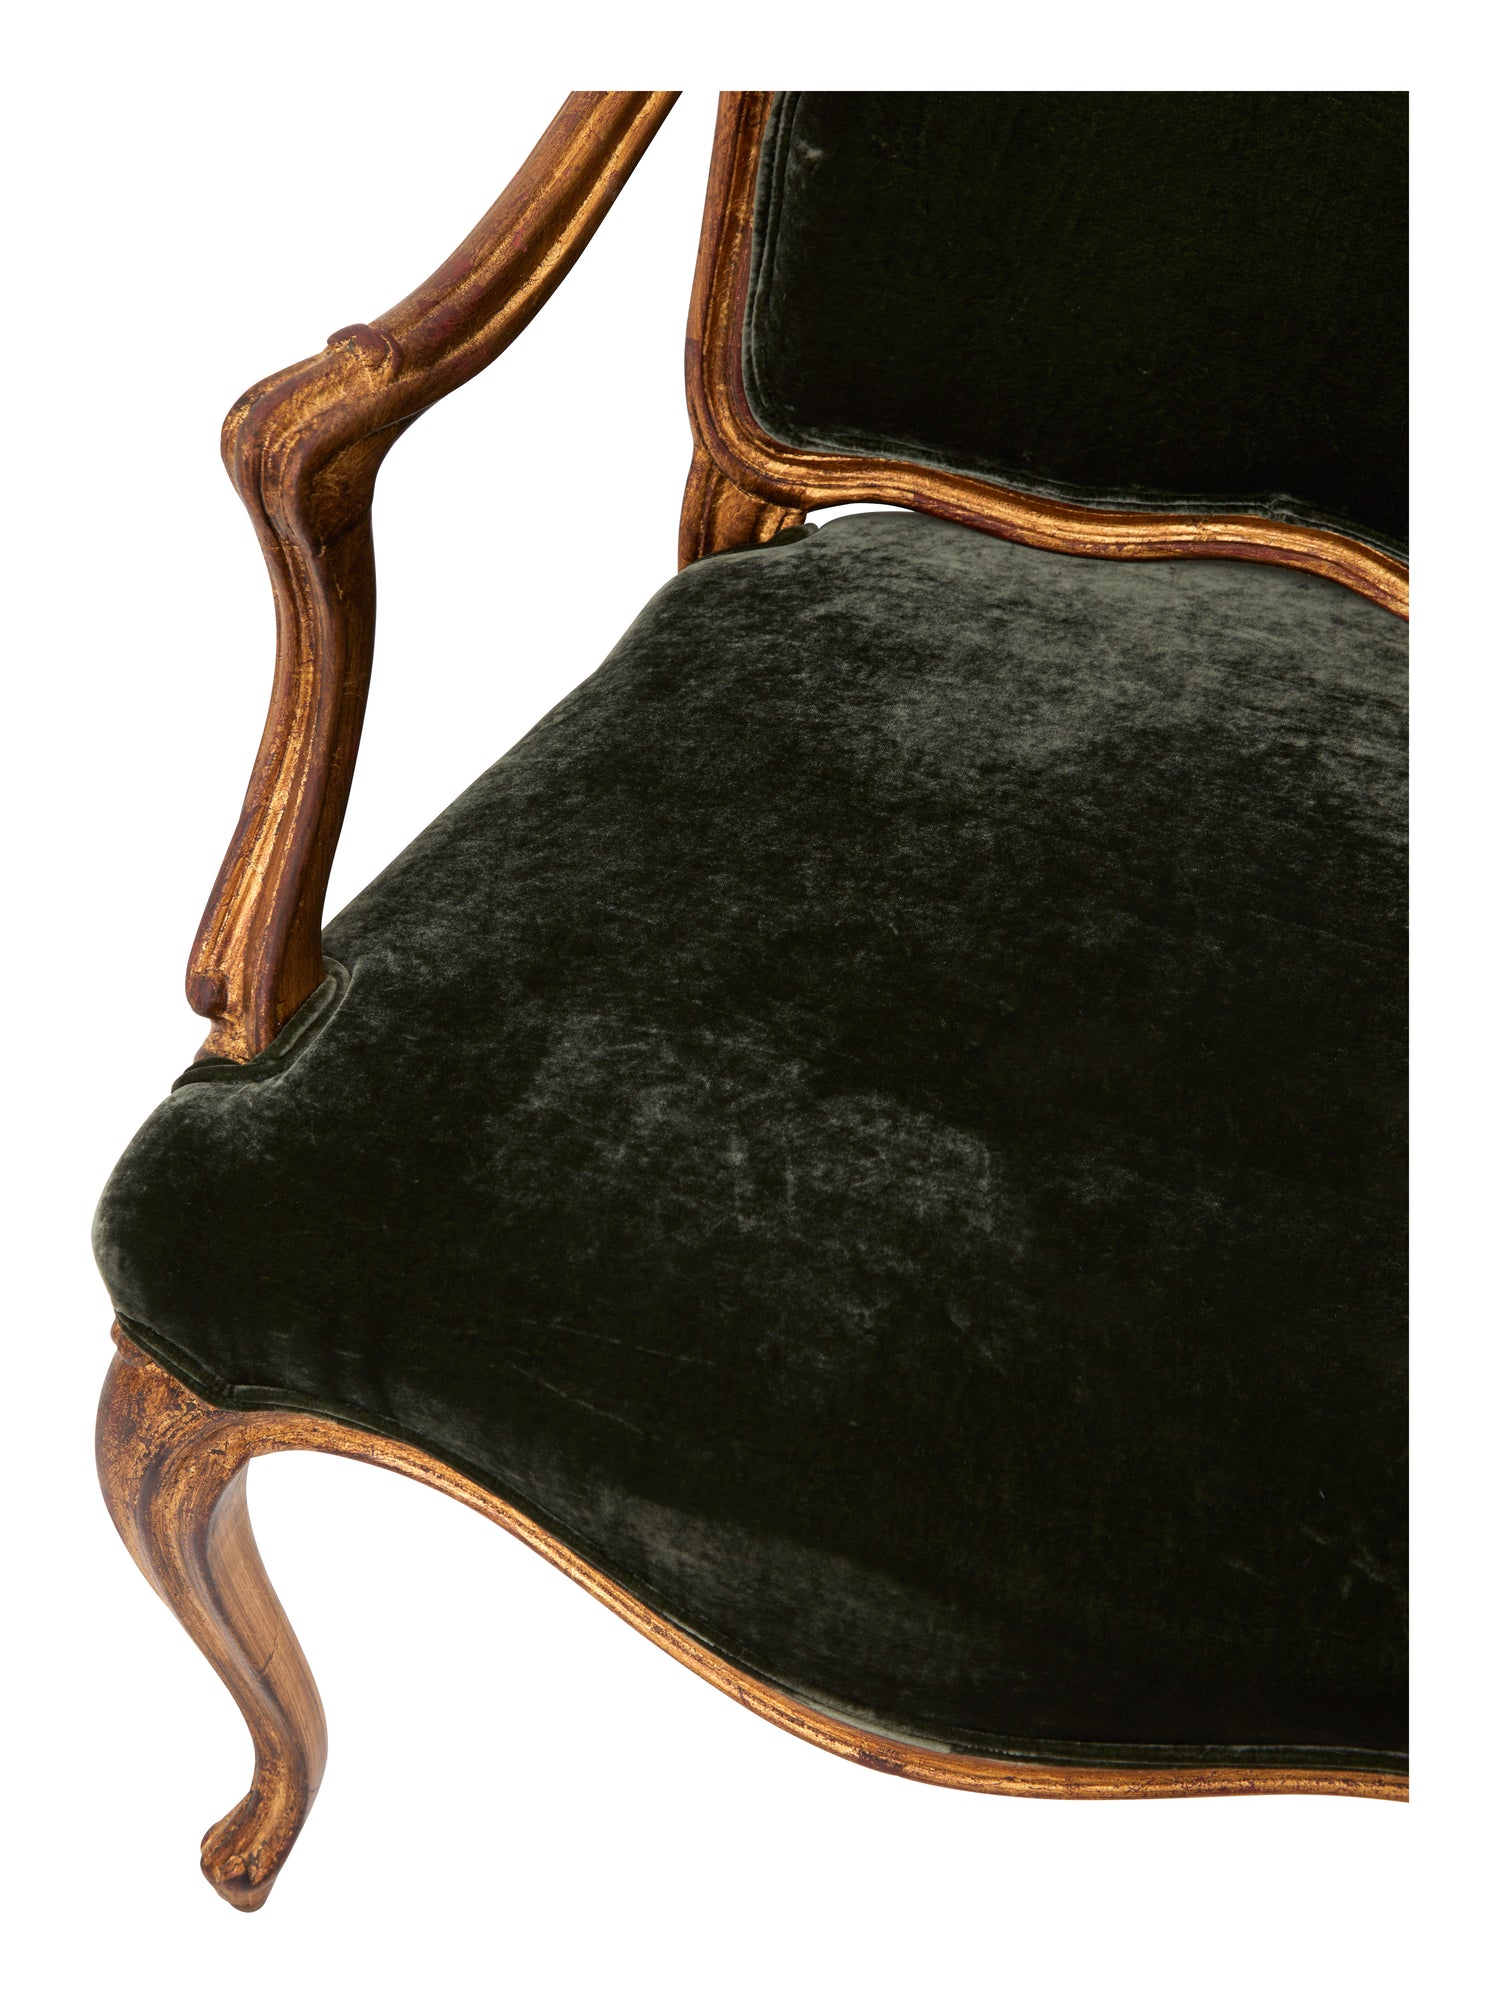 Baudelaire Chair & Jayson Home